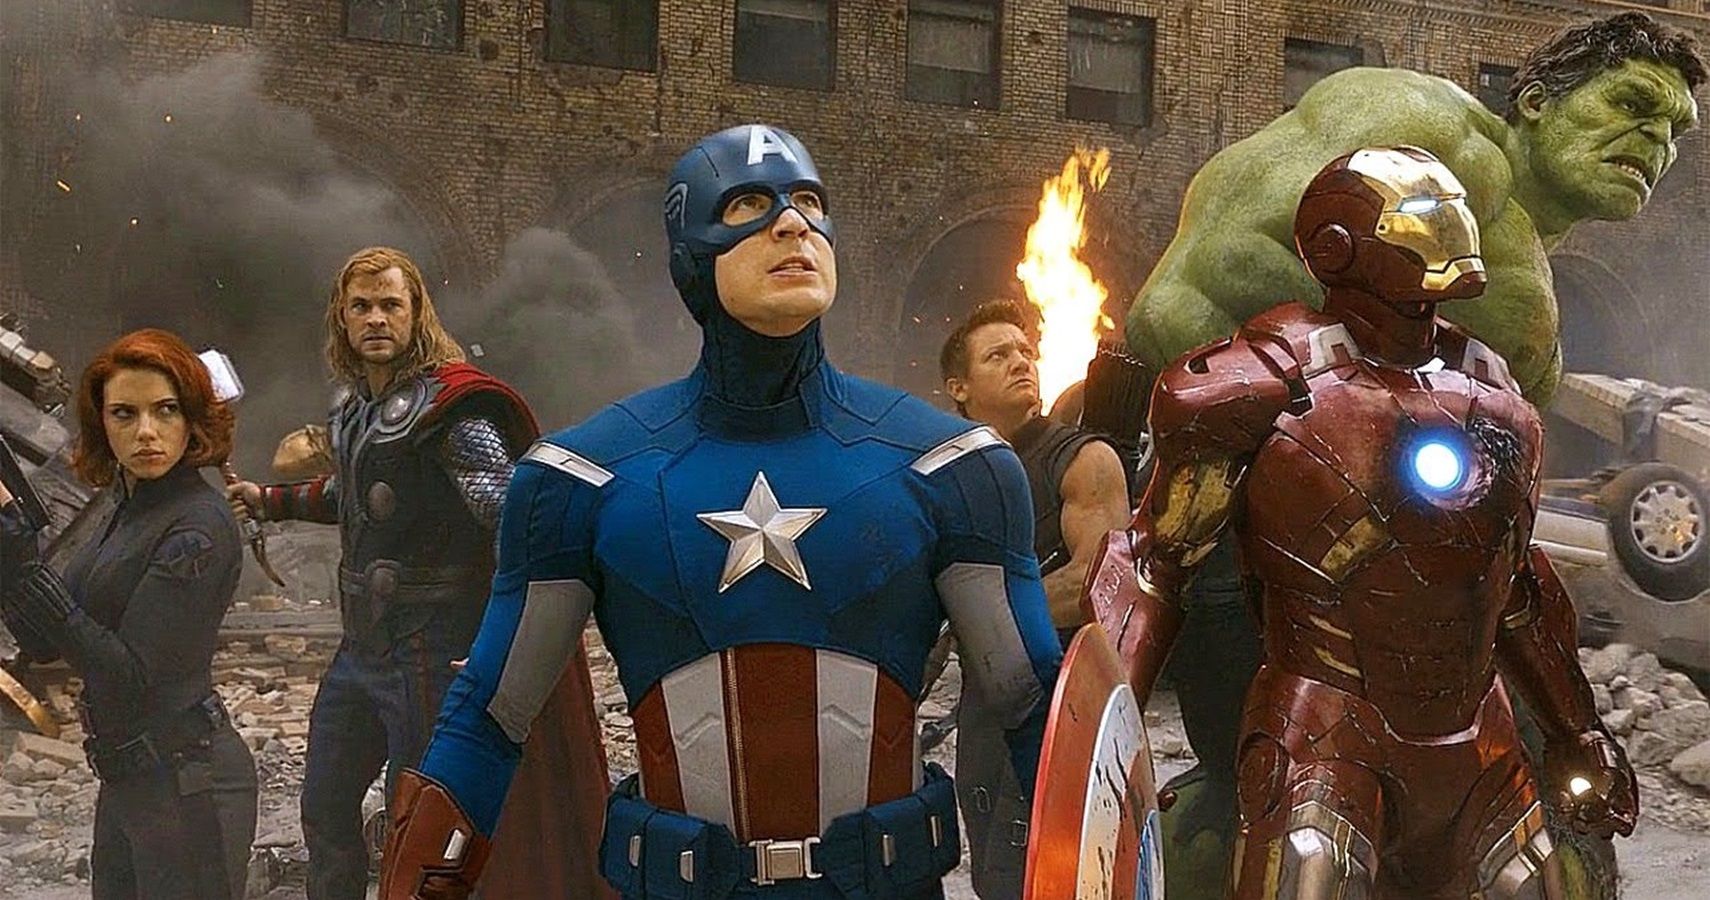 The Avengers: How Much Screen Time Does Each Hero Get?